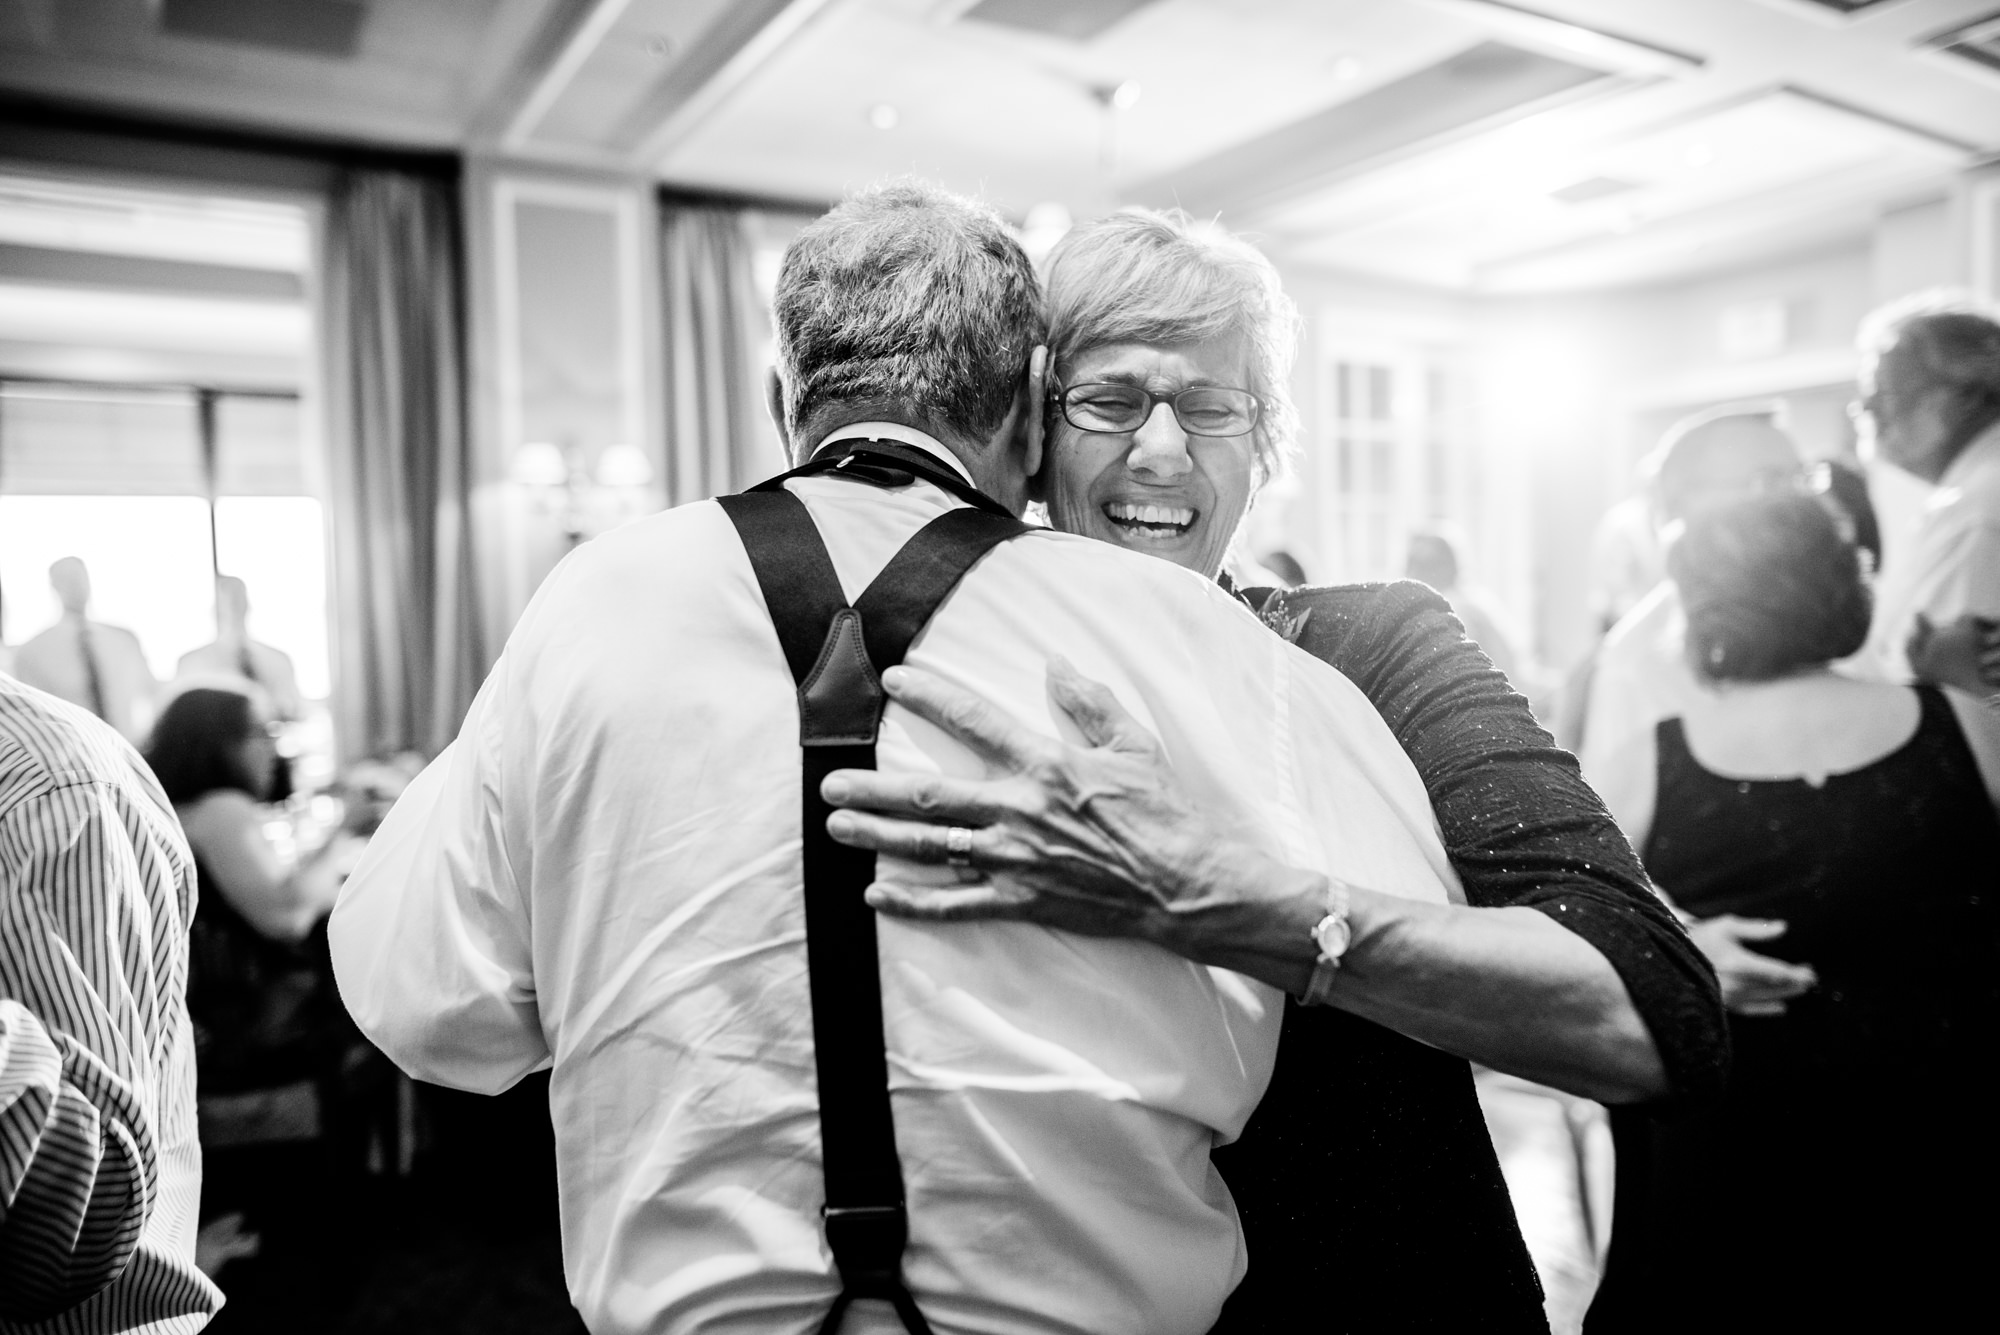 Joelle's parents participate in the "generational" dance portion of Joelle and Ryan's wedding reception at the Seattle Tennis Club, summer 2016. Photo by Seattle Wedding Photographers Jennifer Tai Photo Artistry.